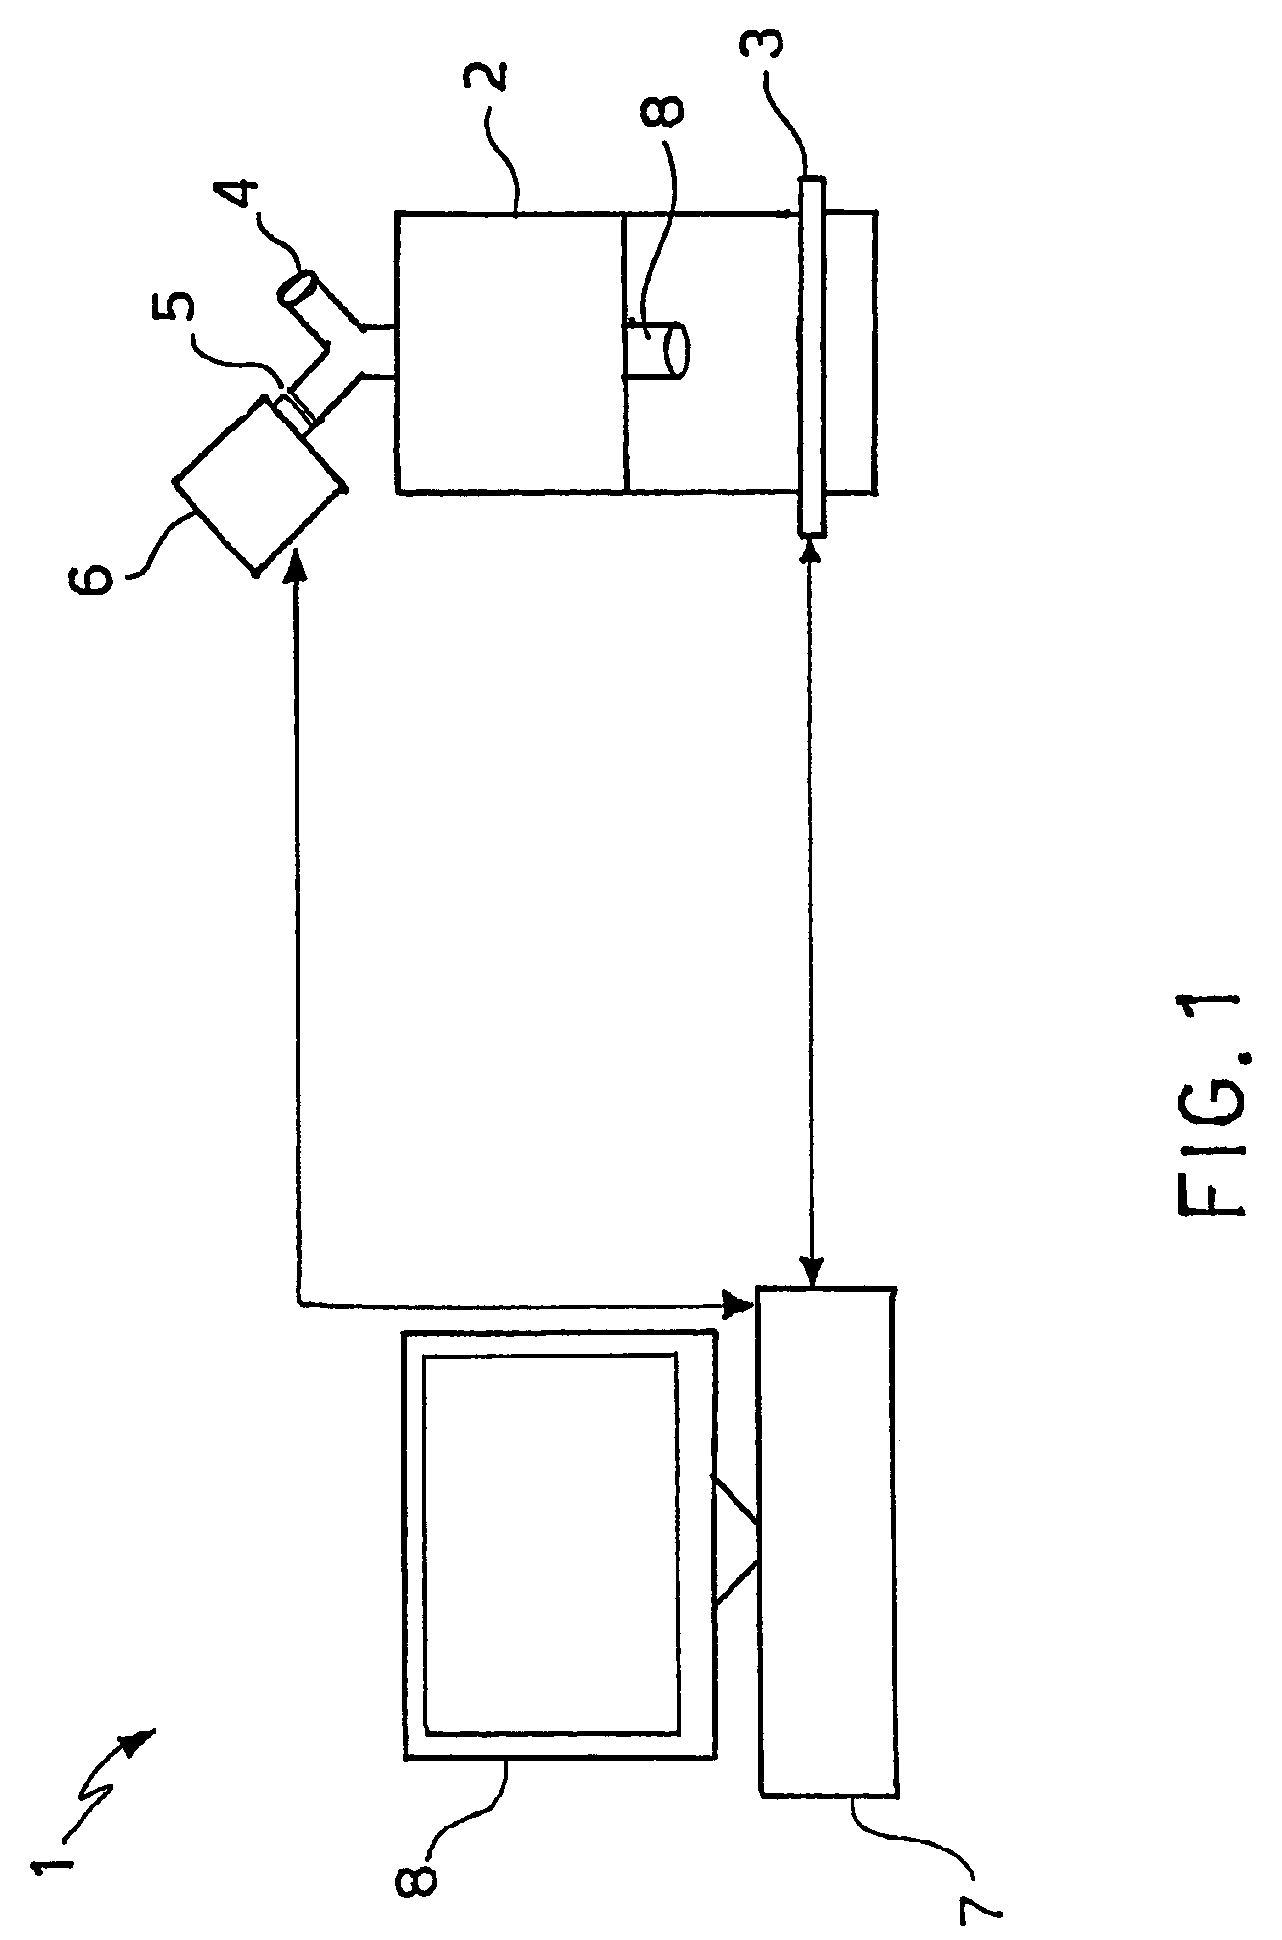 Method and apparatus for analyzing biological tissue specimens